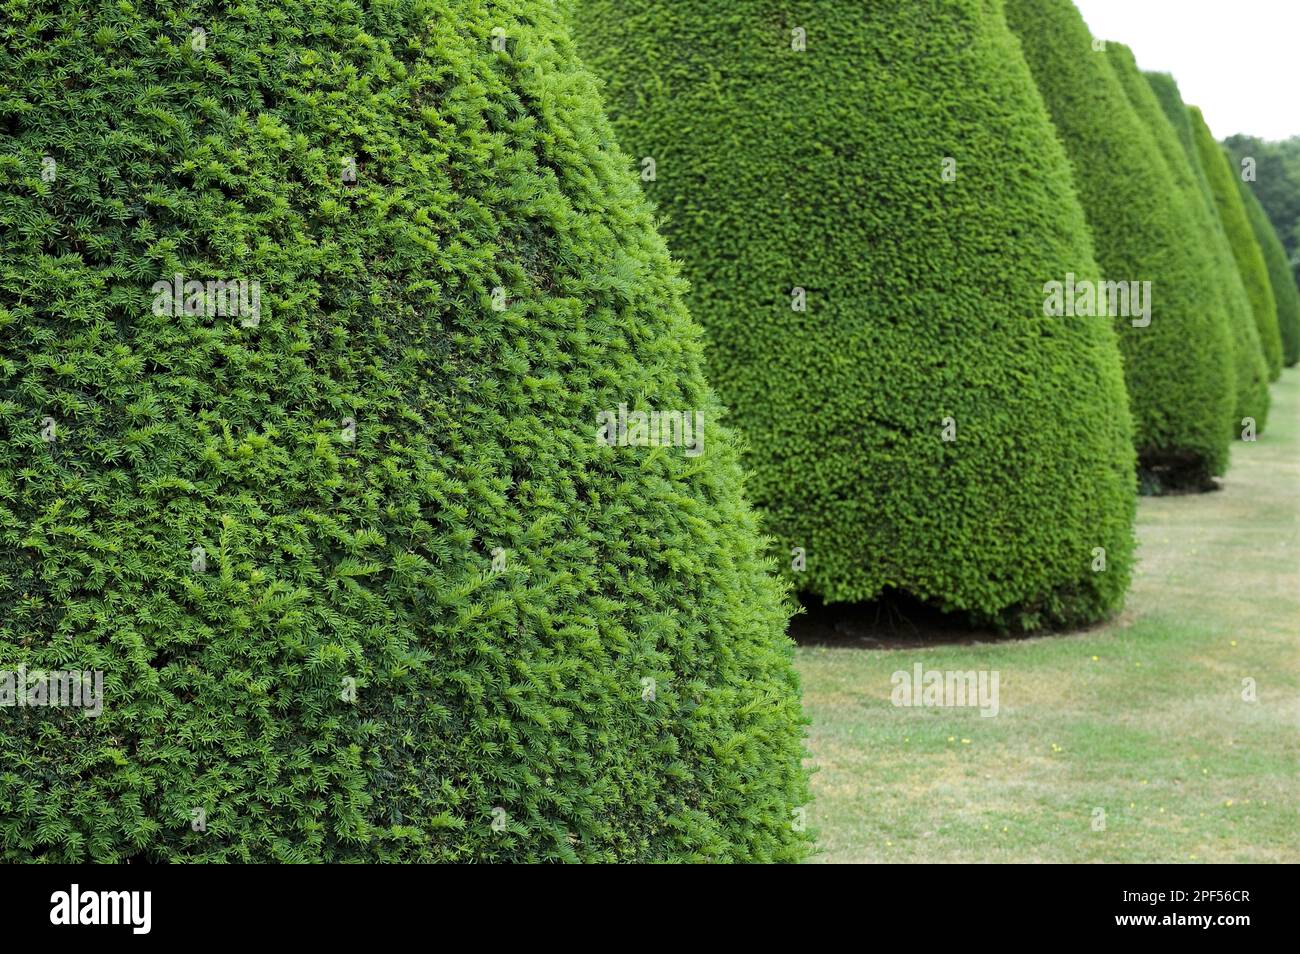 English yew (Taxus baccata), Common yew, Common yew clipped trees, in large garden, Norfolk, England, United Kingdom Stock Photo